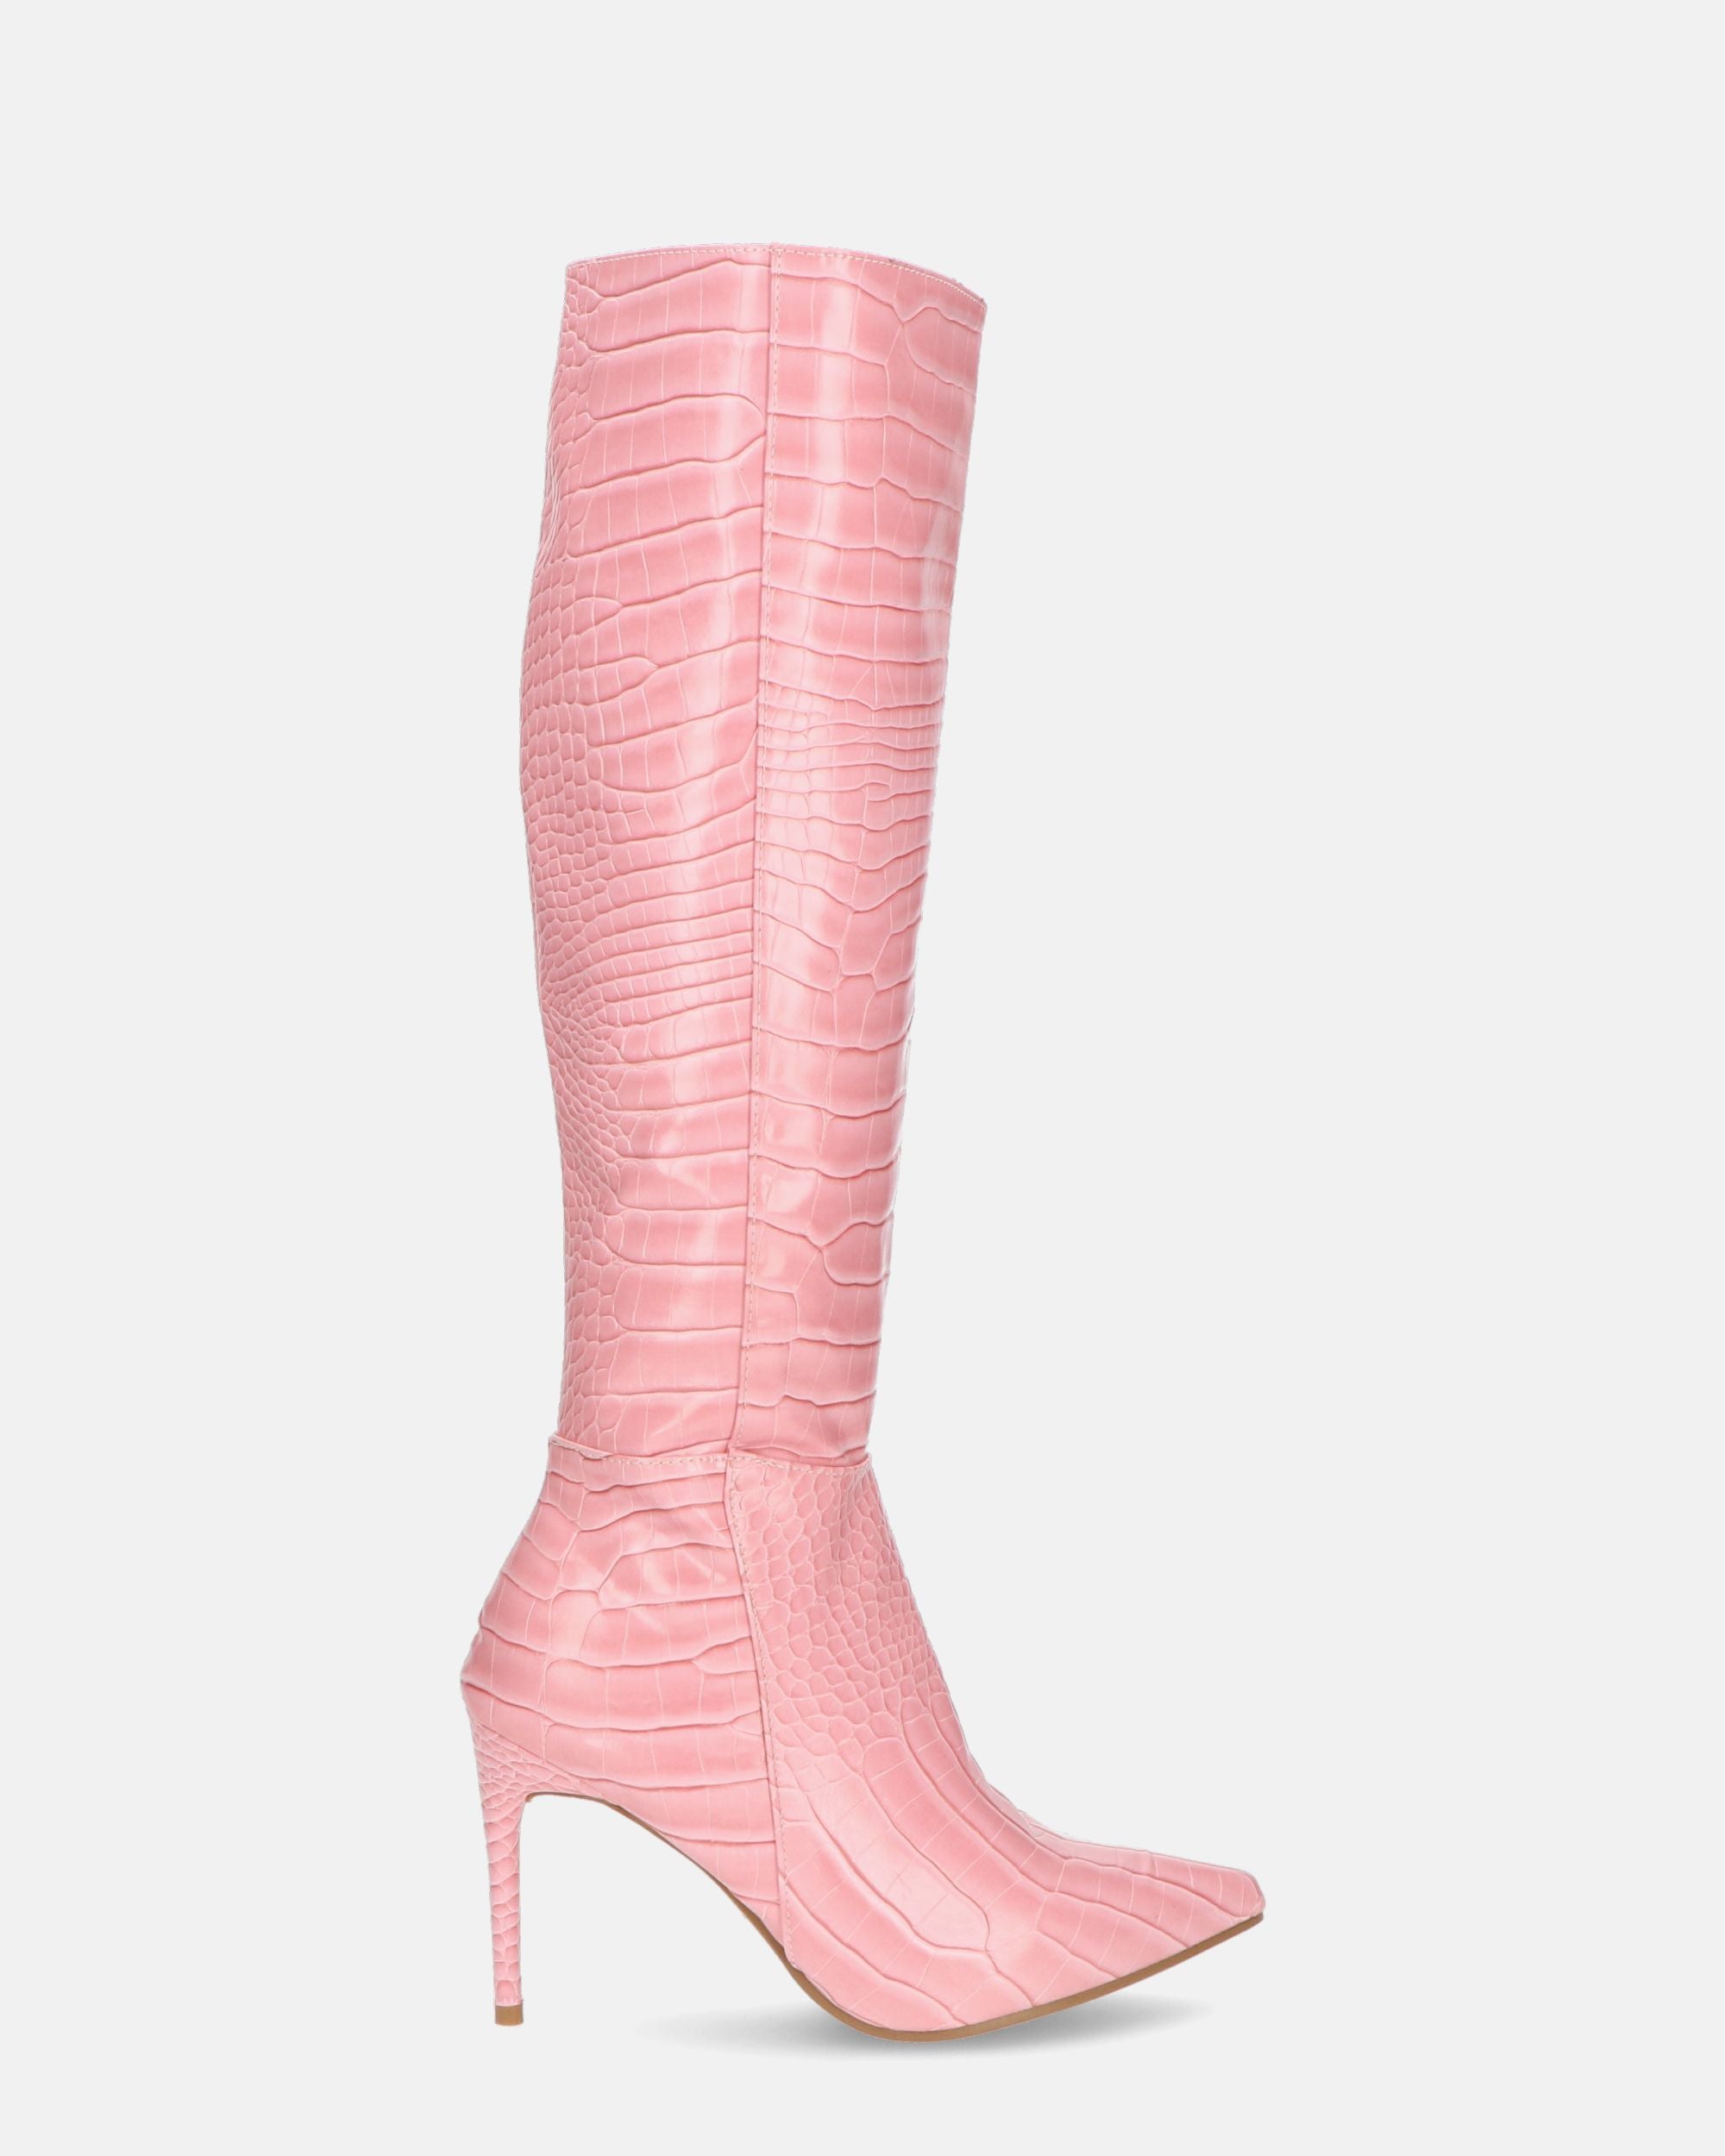 LAILA - high boots in pink eco-leather with crocodile texture and side belt